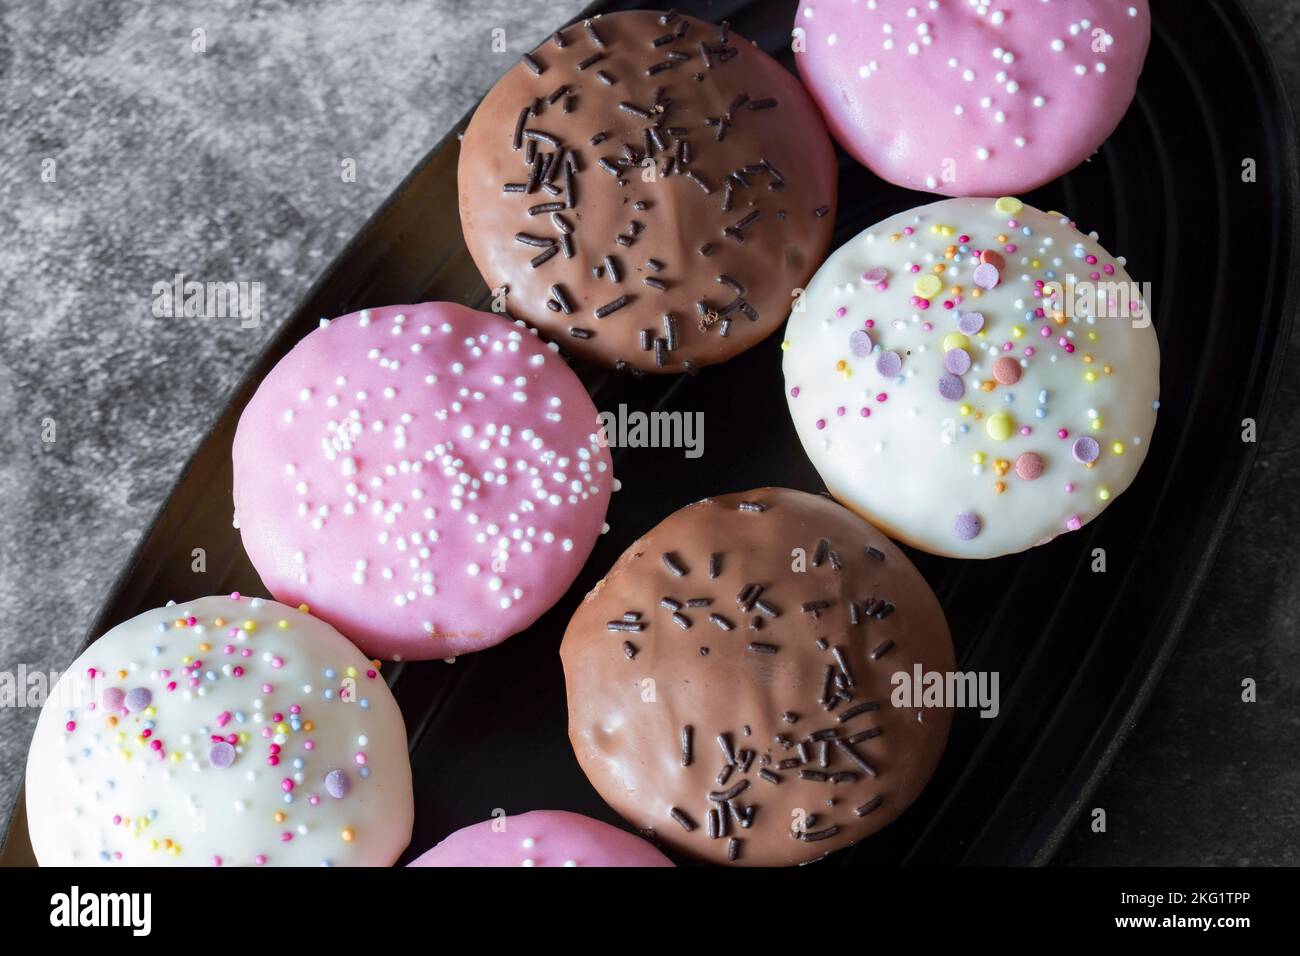 Cupcakes, decorated with icing and sprinkles on a black serving dish. On a dark concrete background Stock Photo